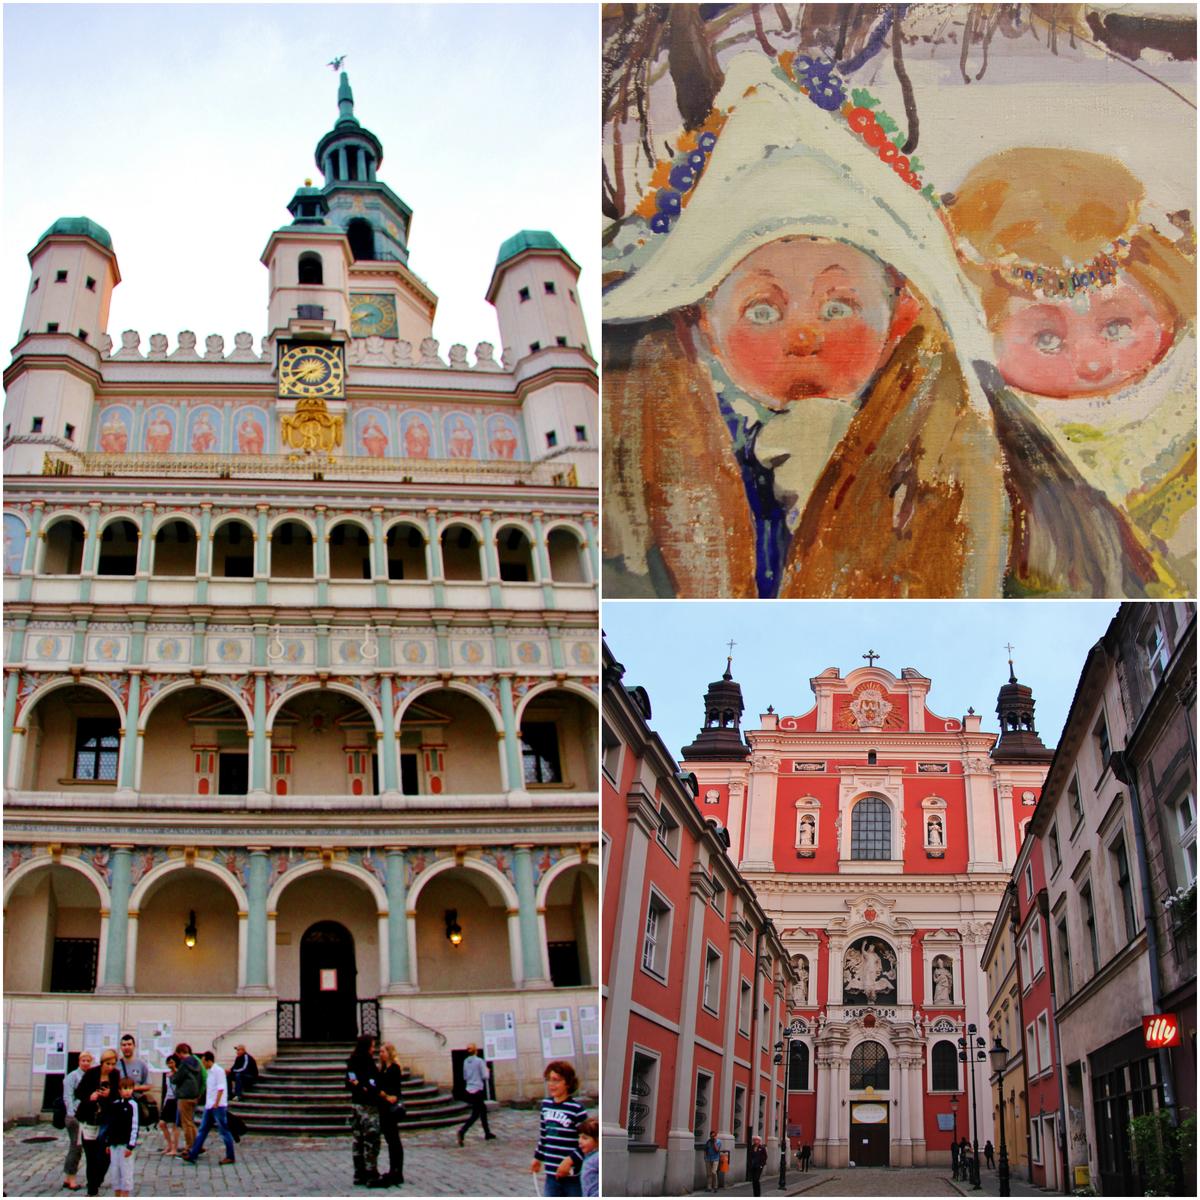 Old Town Hall, Poznan (The Culture Map)